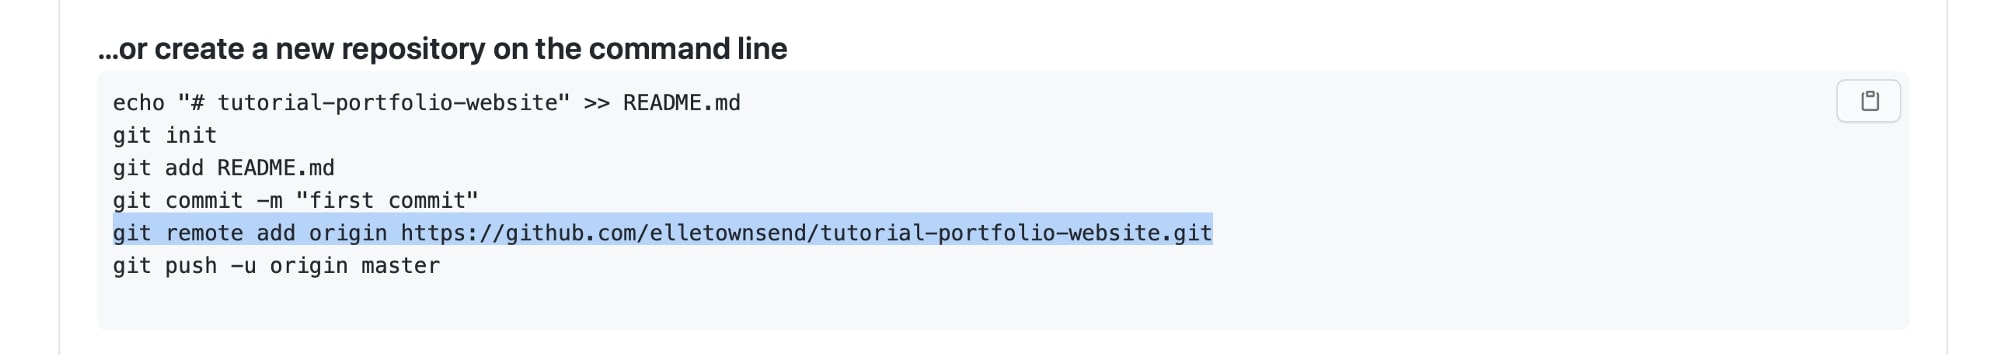 Screenshot of the required line from the github site - the 5th line down